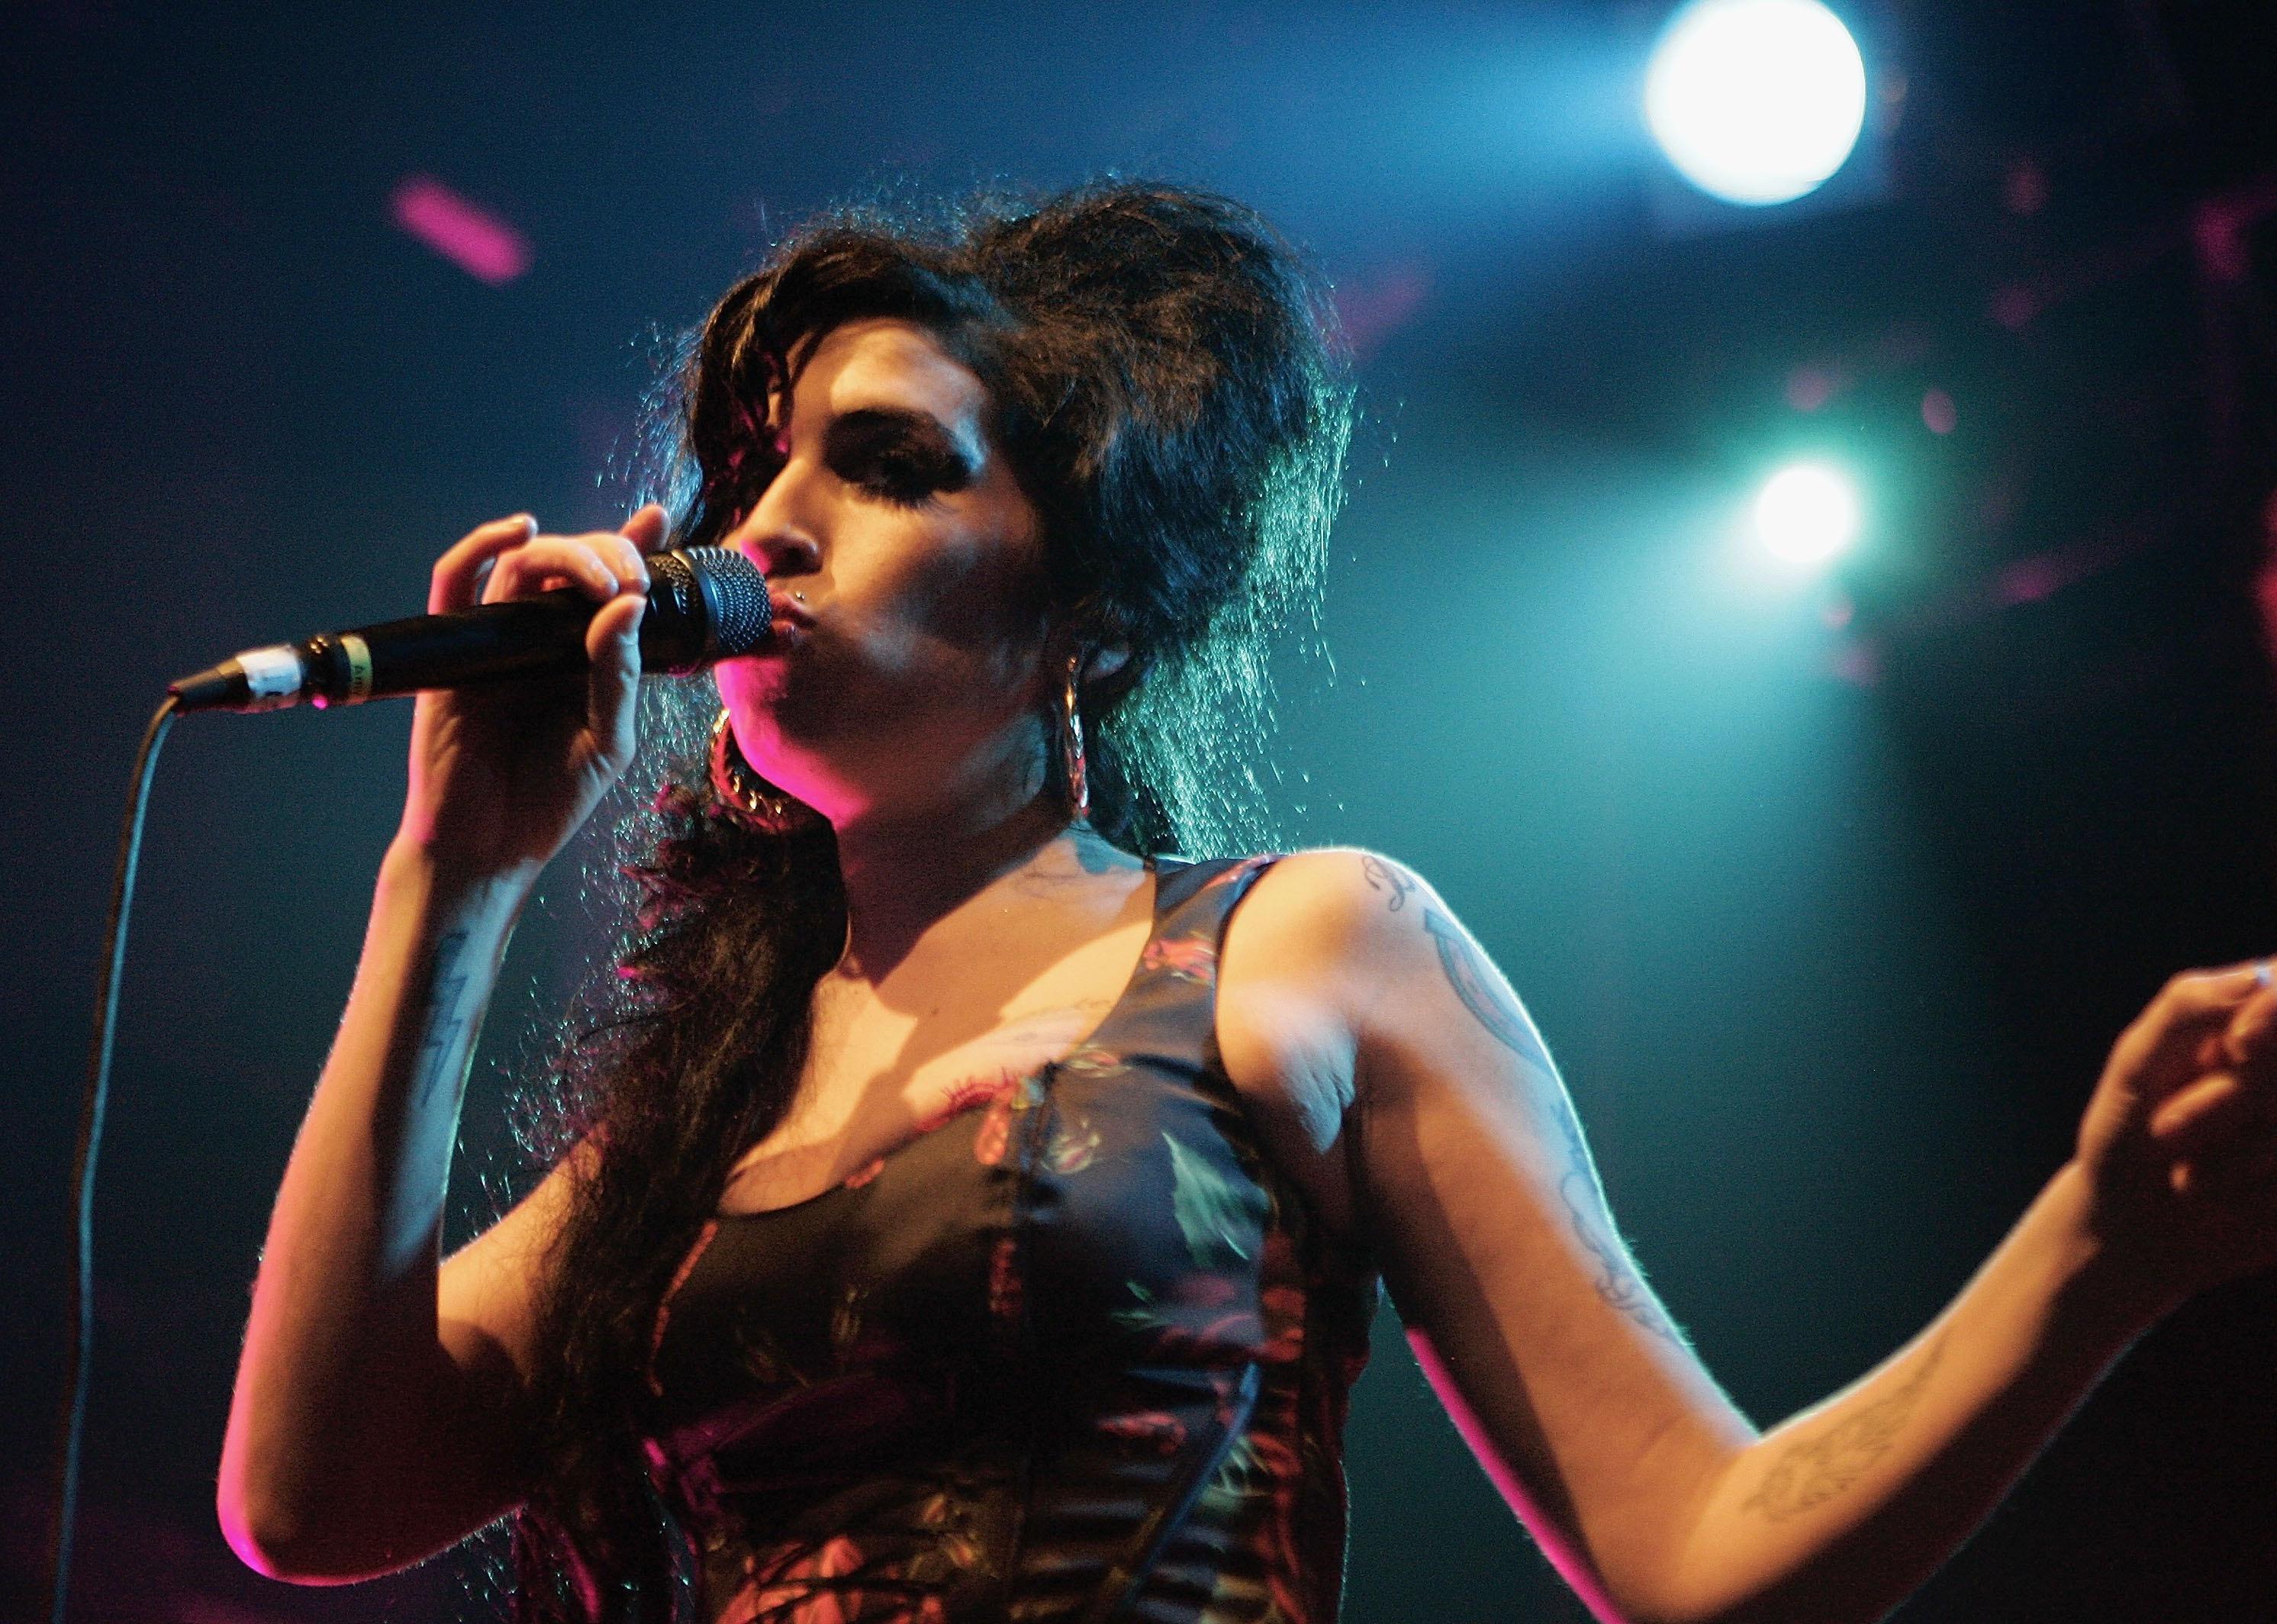 Amy Winehouse performs one of her songs